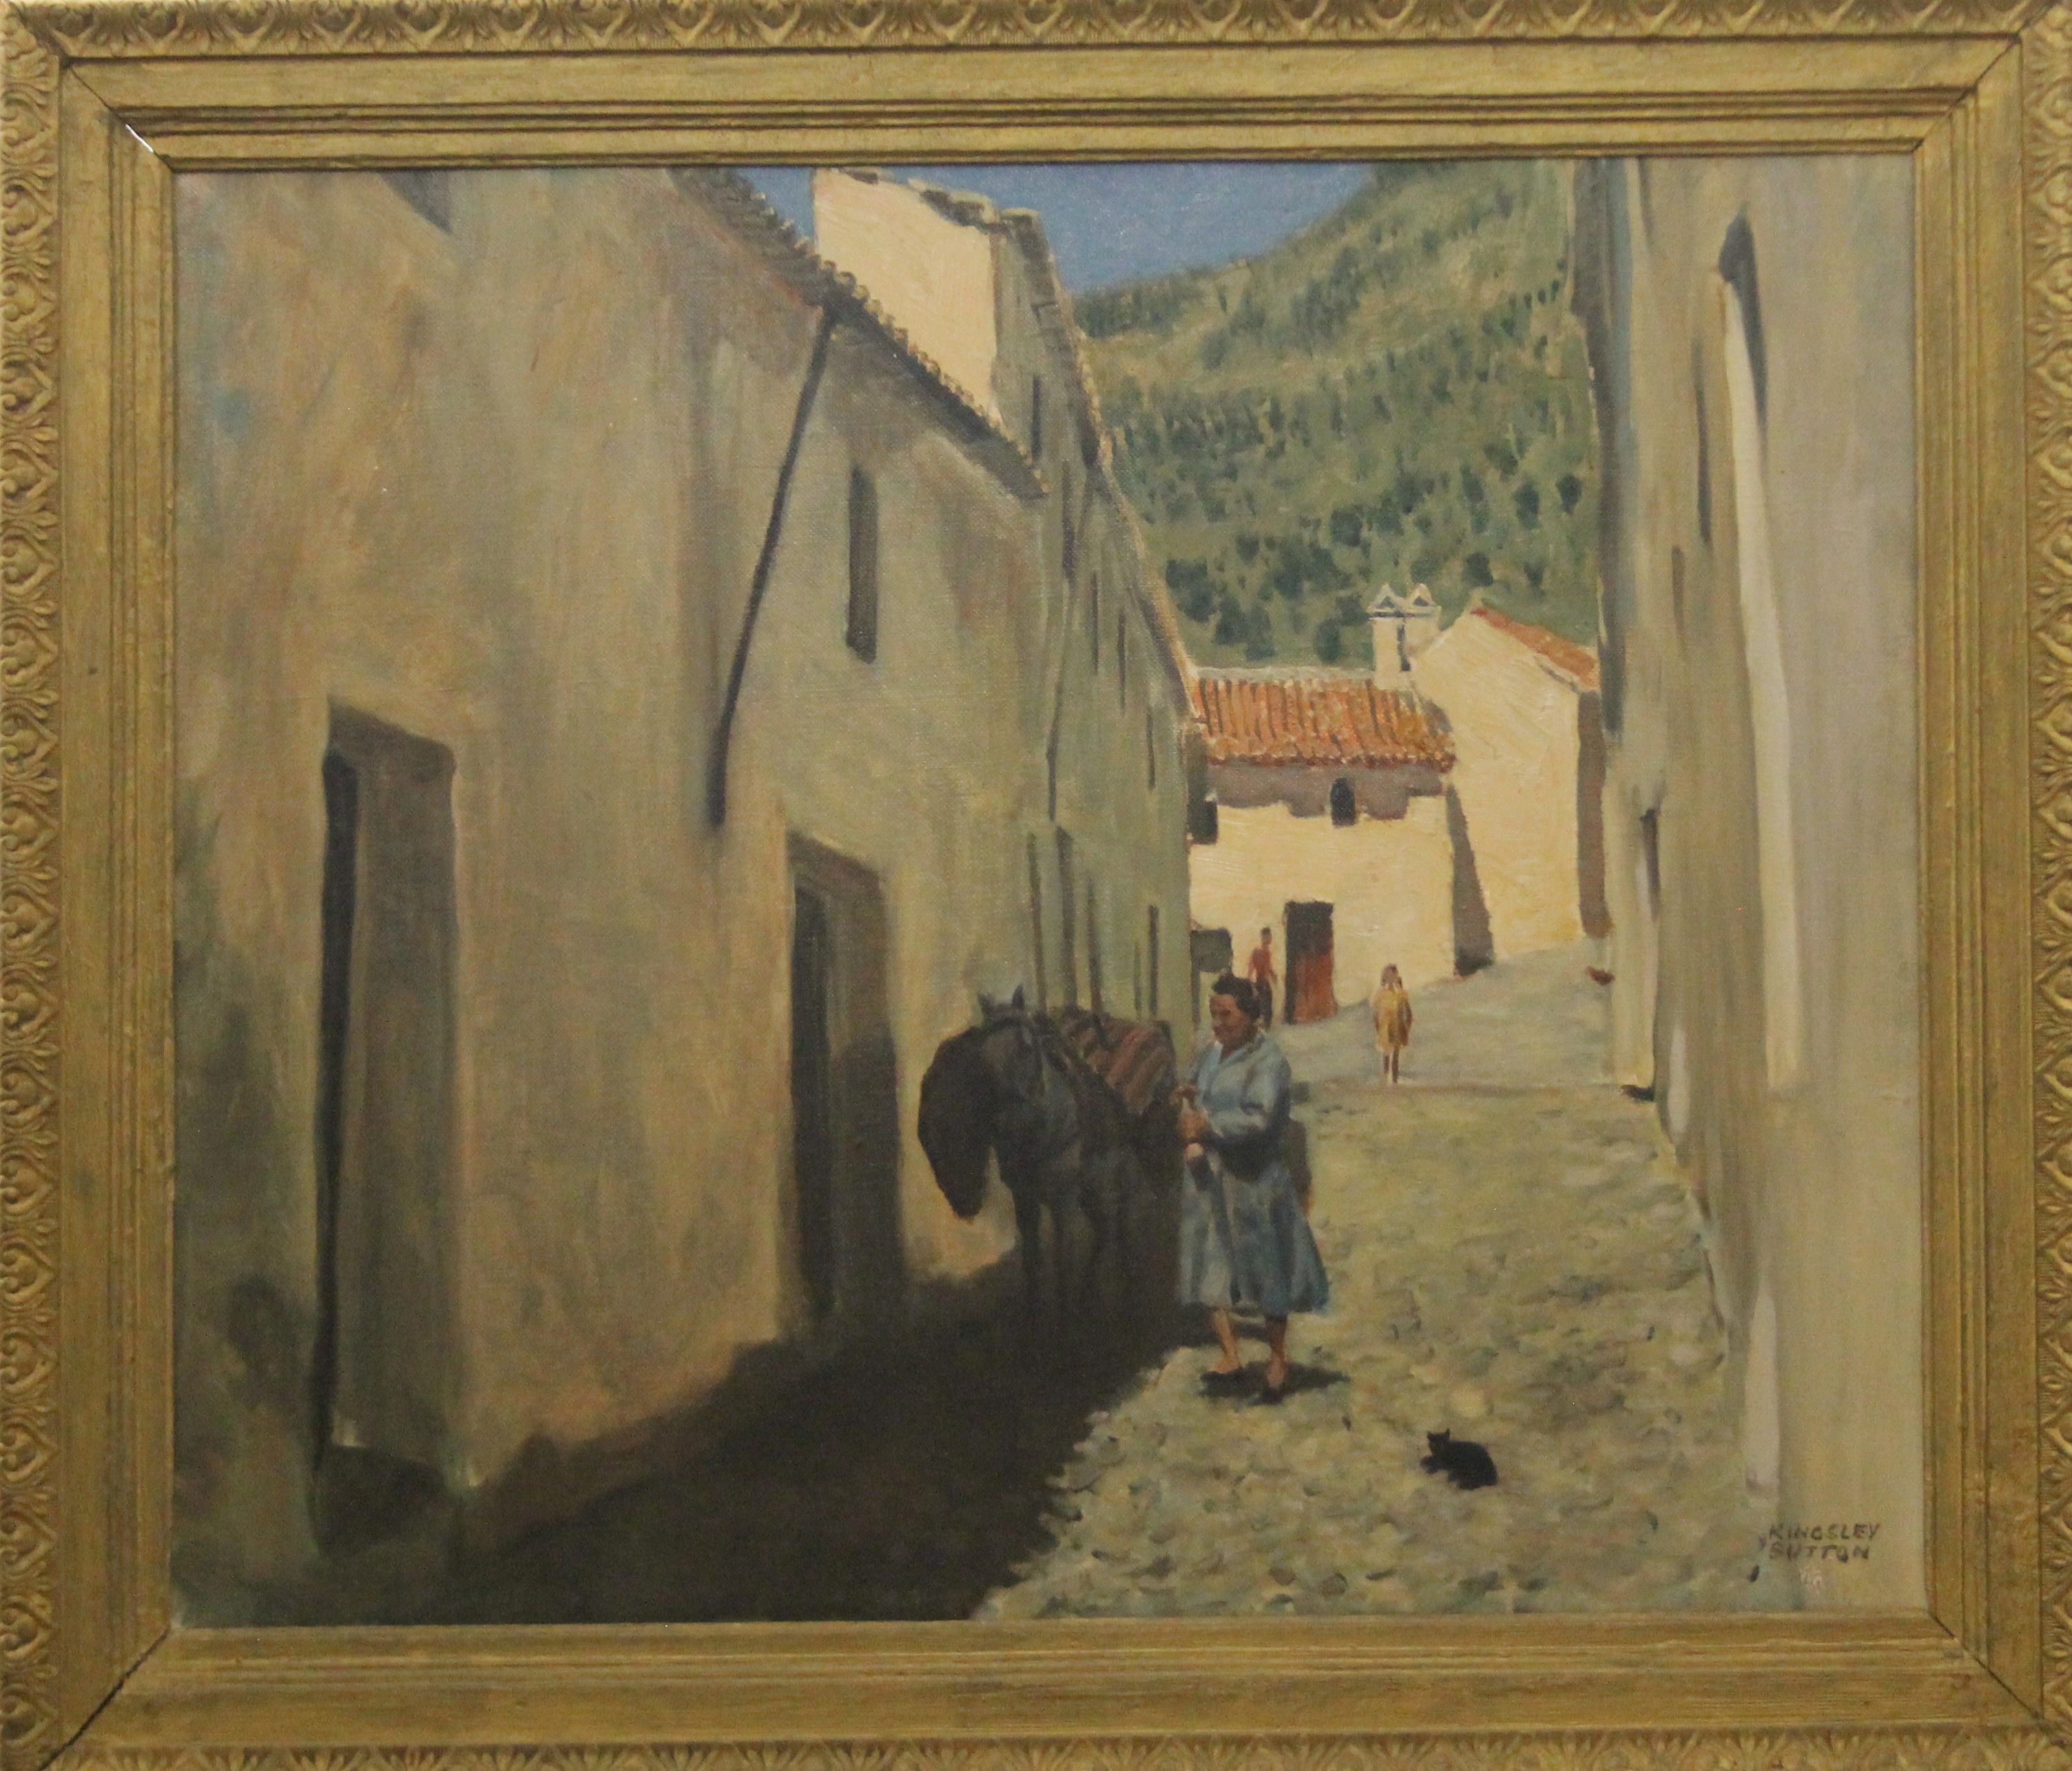 KINGSLEY SUTTON (1907-1976) British, Malaga Spain, oil on canvas, signed and framed. 49 x 48 cm. - Image 2 of 3